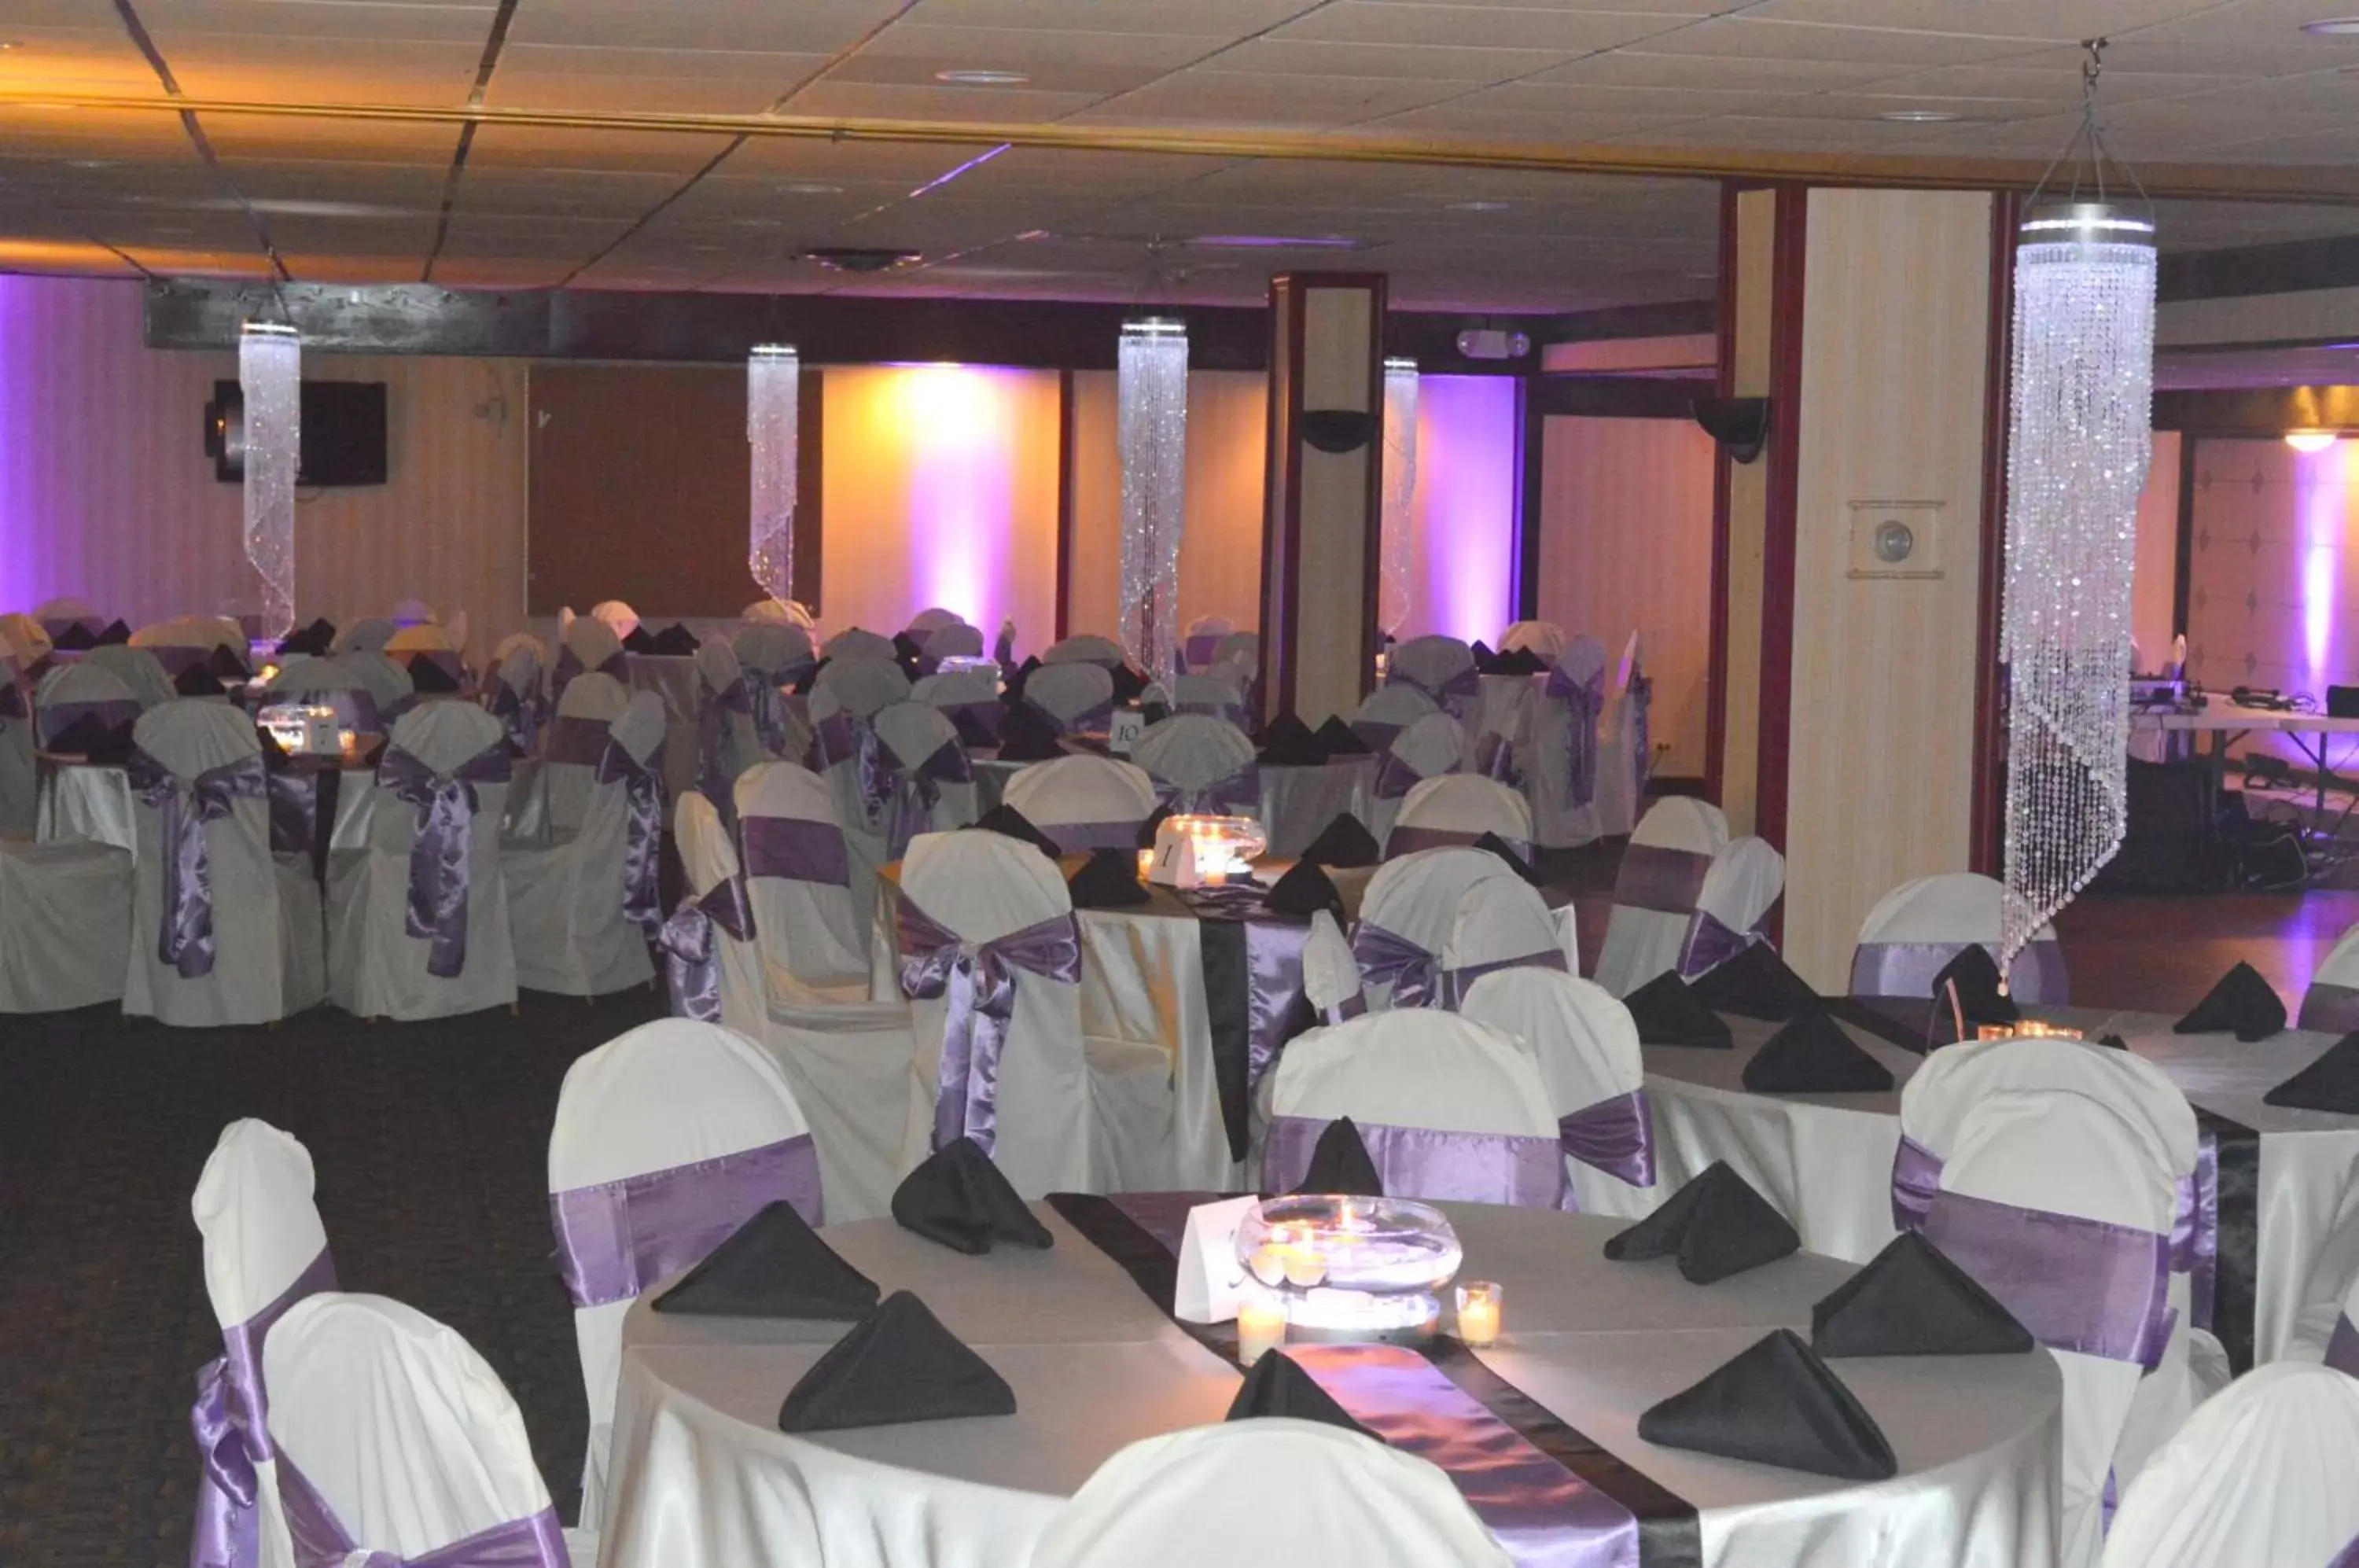 Banquet/Function facilities, Banquet Facilities in Days Inn by Wyndham Pittsburgh